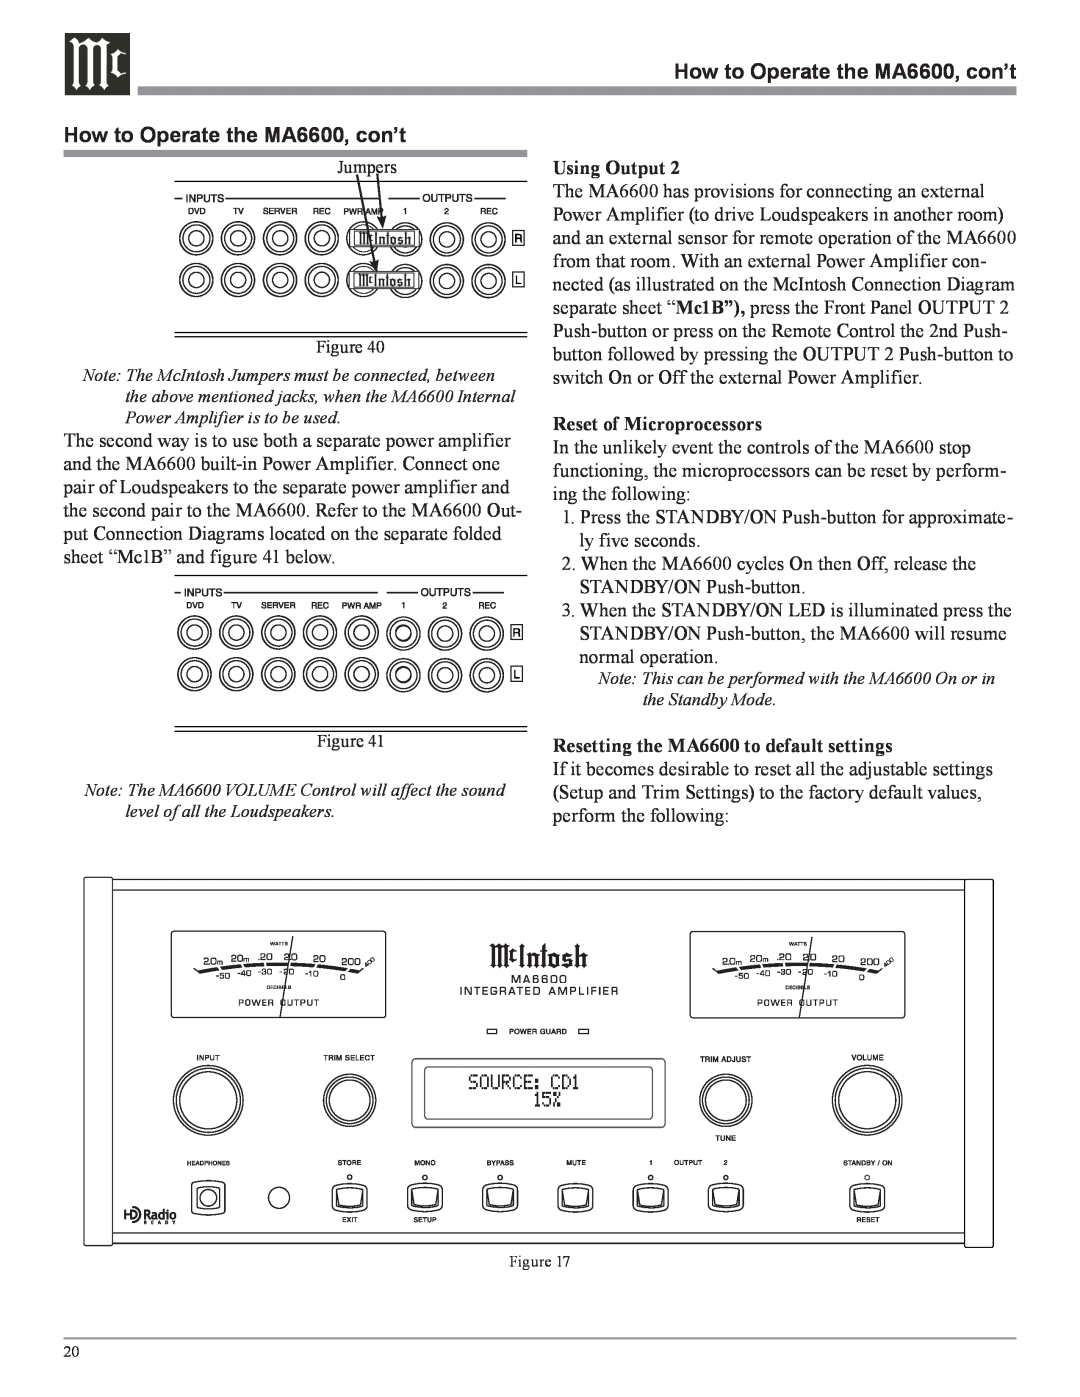 McIntosh owner manual How to Operate the MA6600, con’t, Using Output, Reset of Microprocessors 